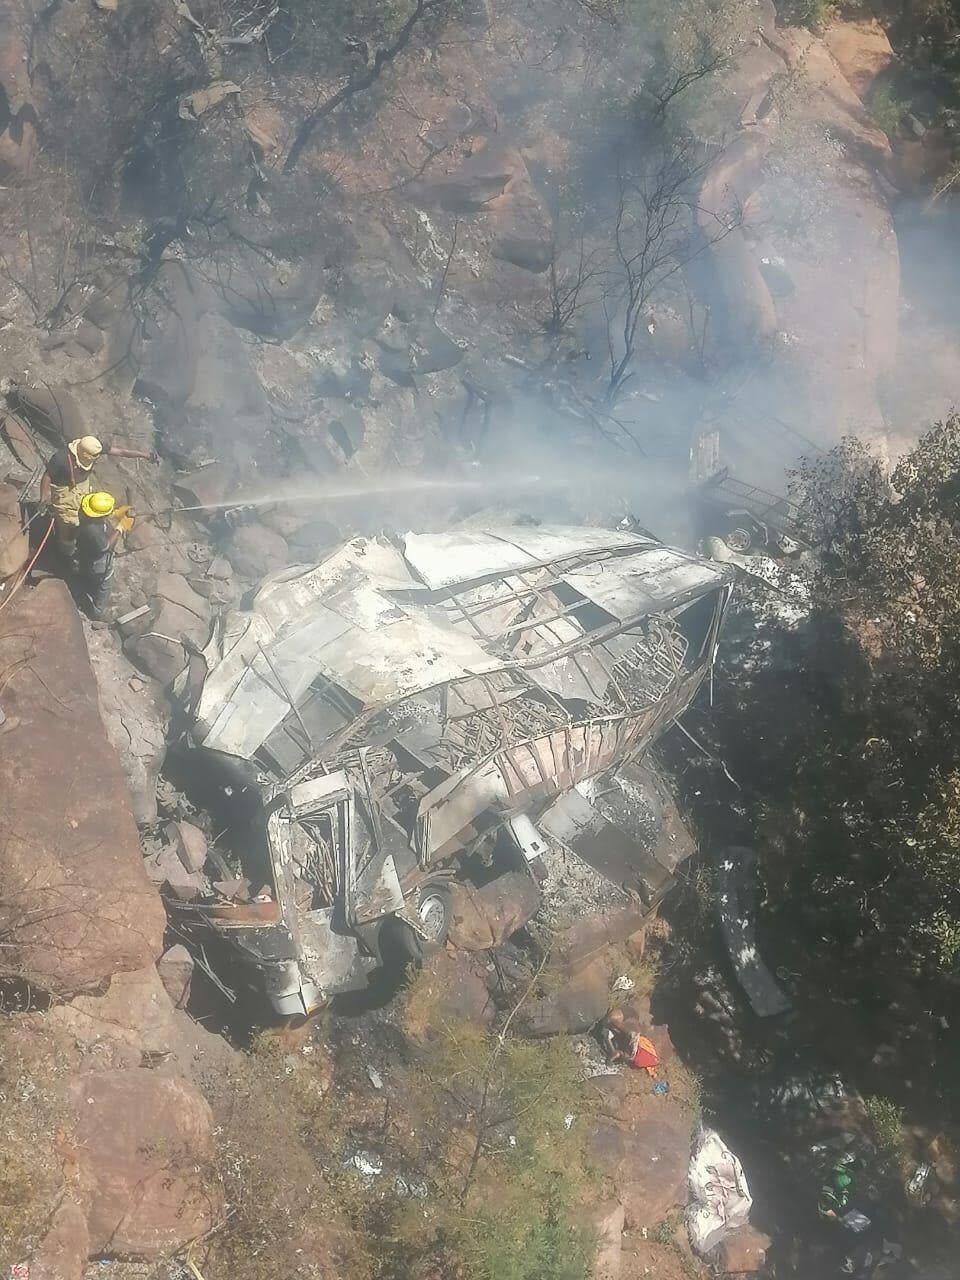 Rescue workers at the scene of the bus crash Mamatlakala, South Africa, on March 28, 2024. / Credit: Limpopo Department of Transport and Community Safety